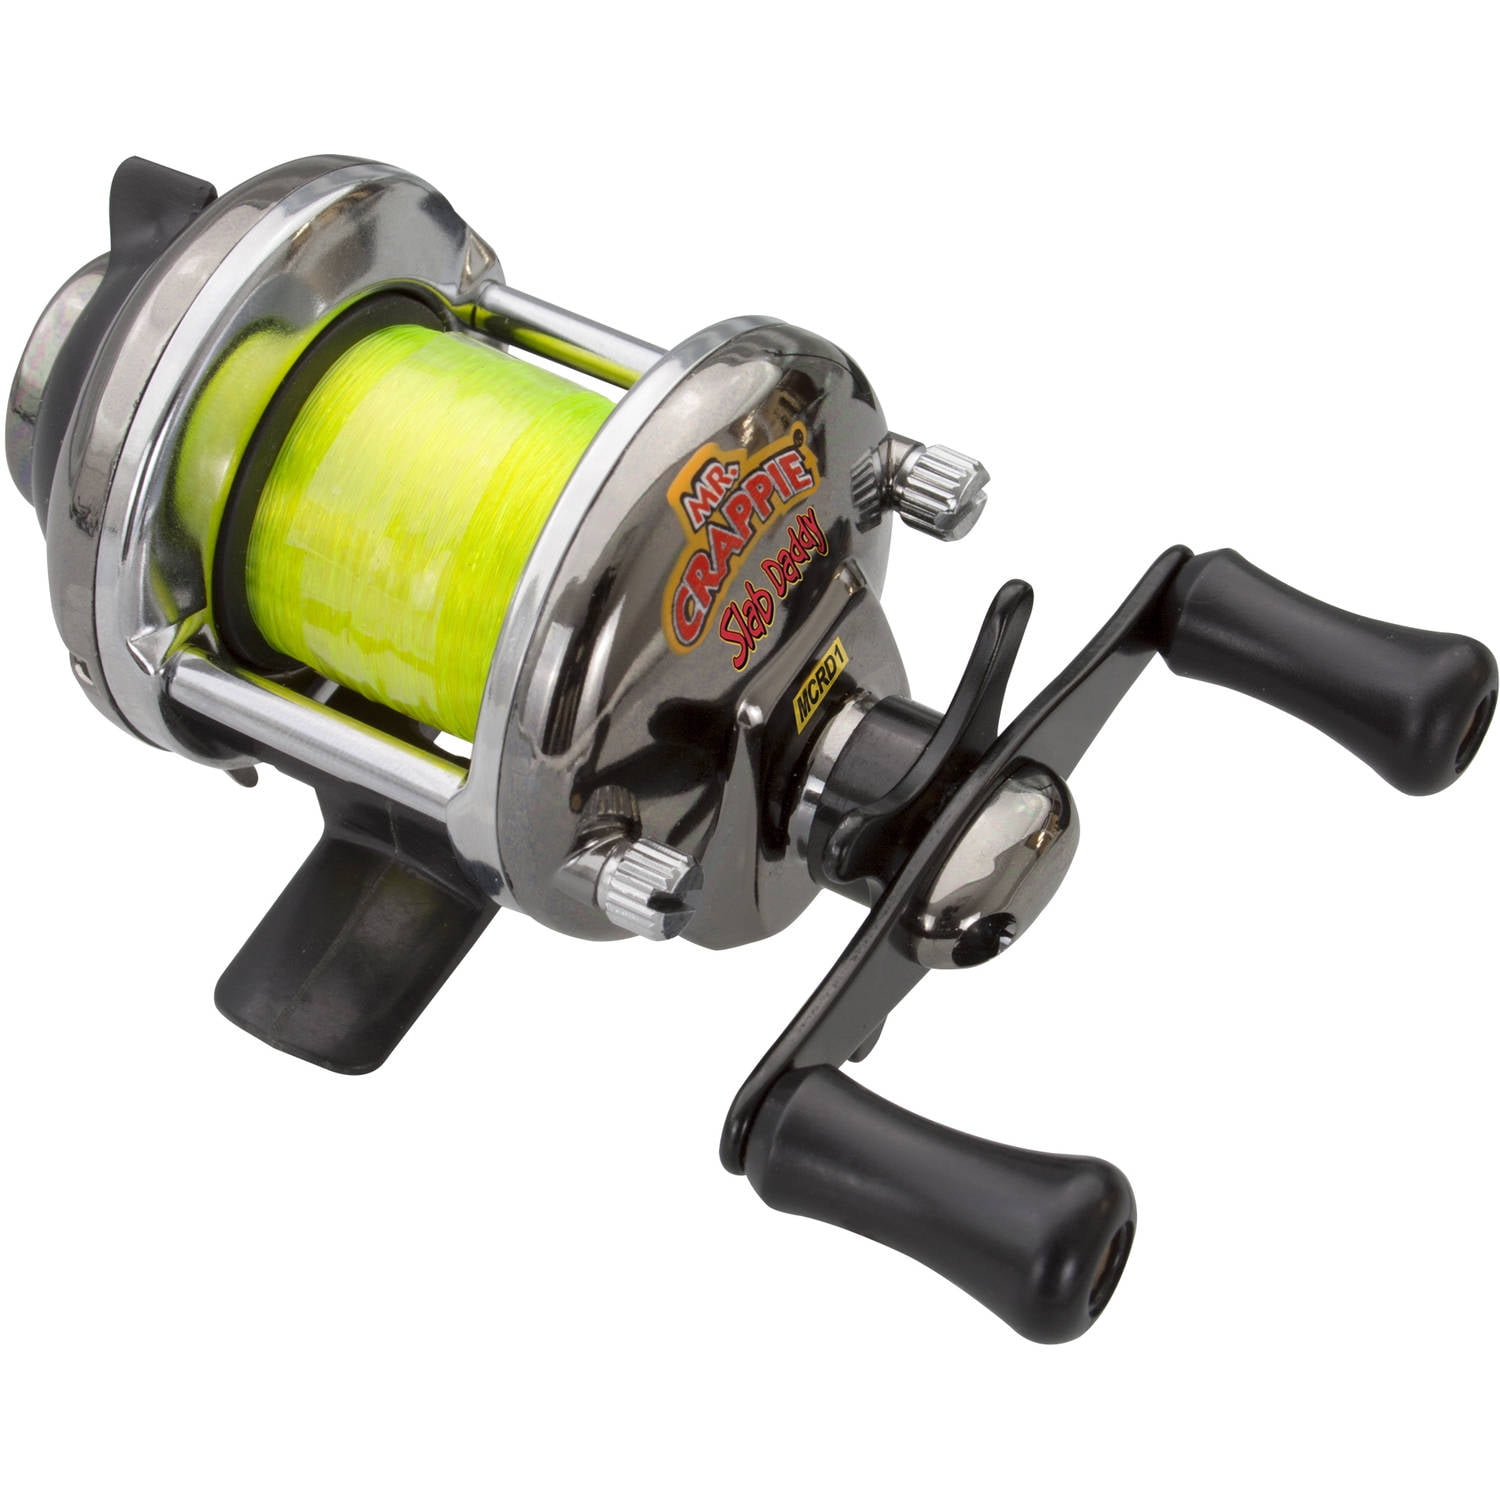 Lew's Mr. Crappie Slab Daddy Deluxe Fishing Reel 